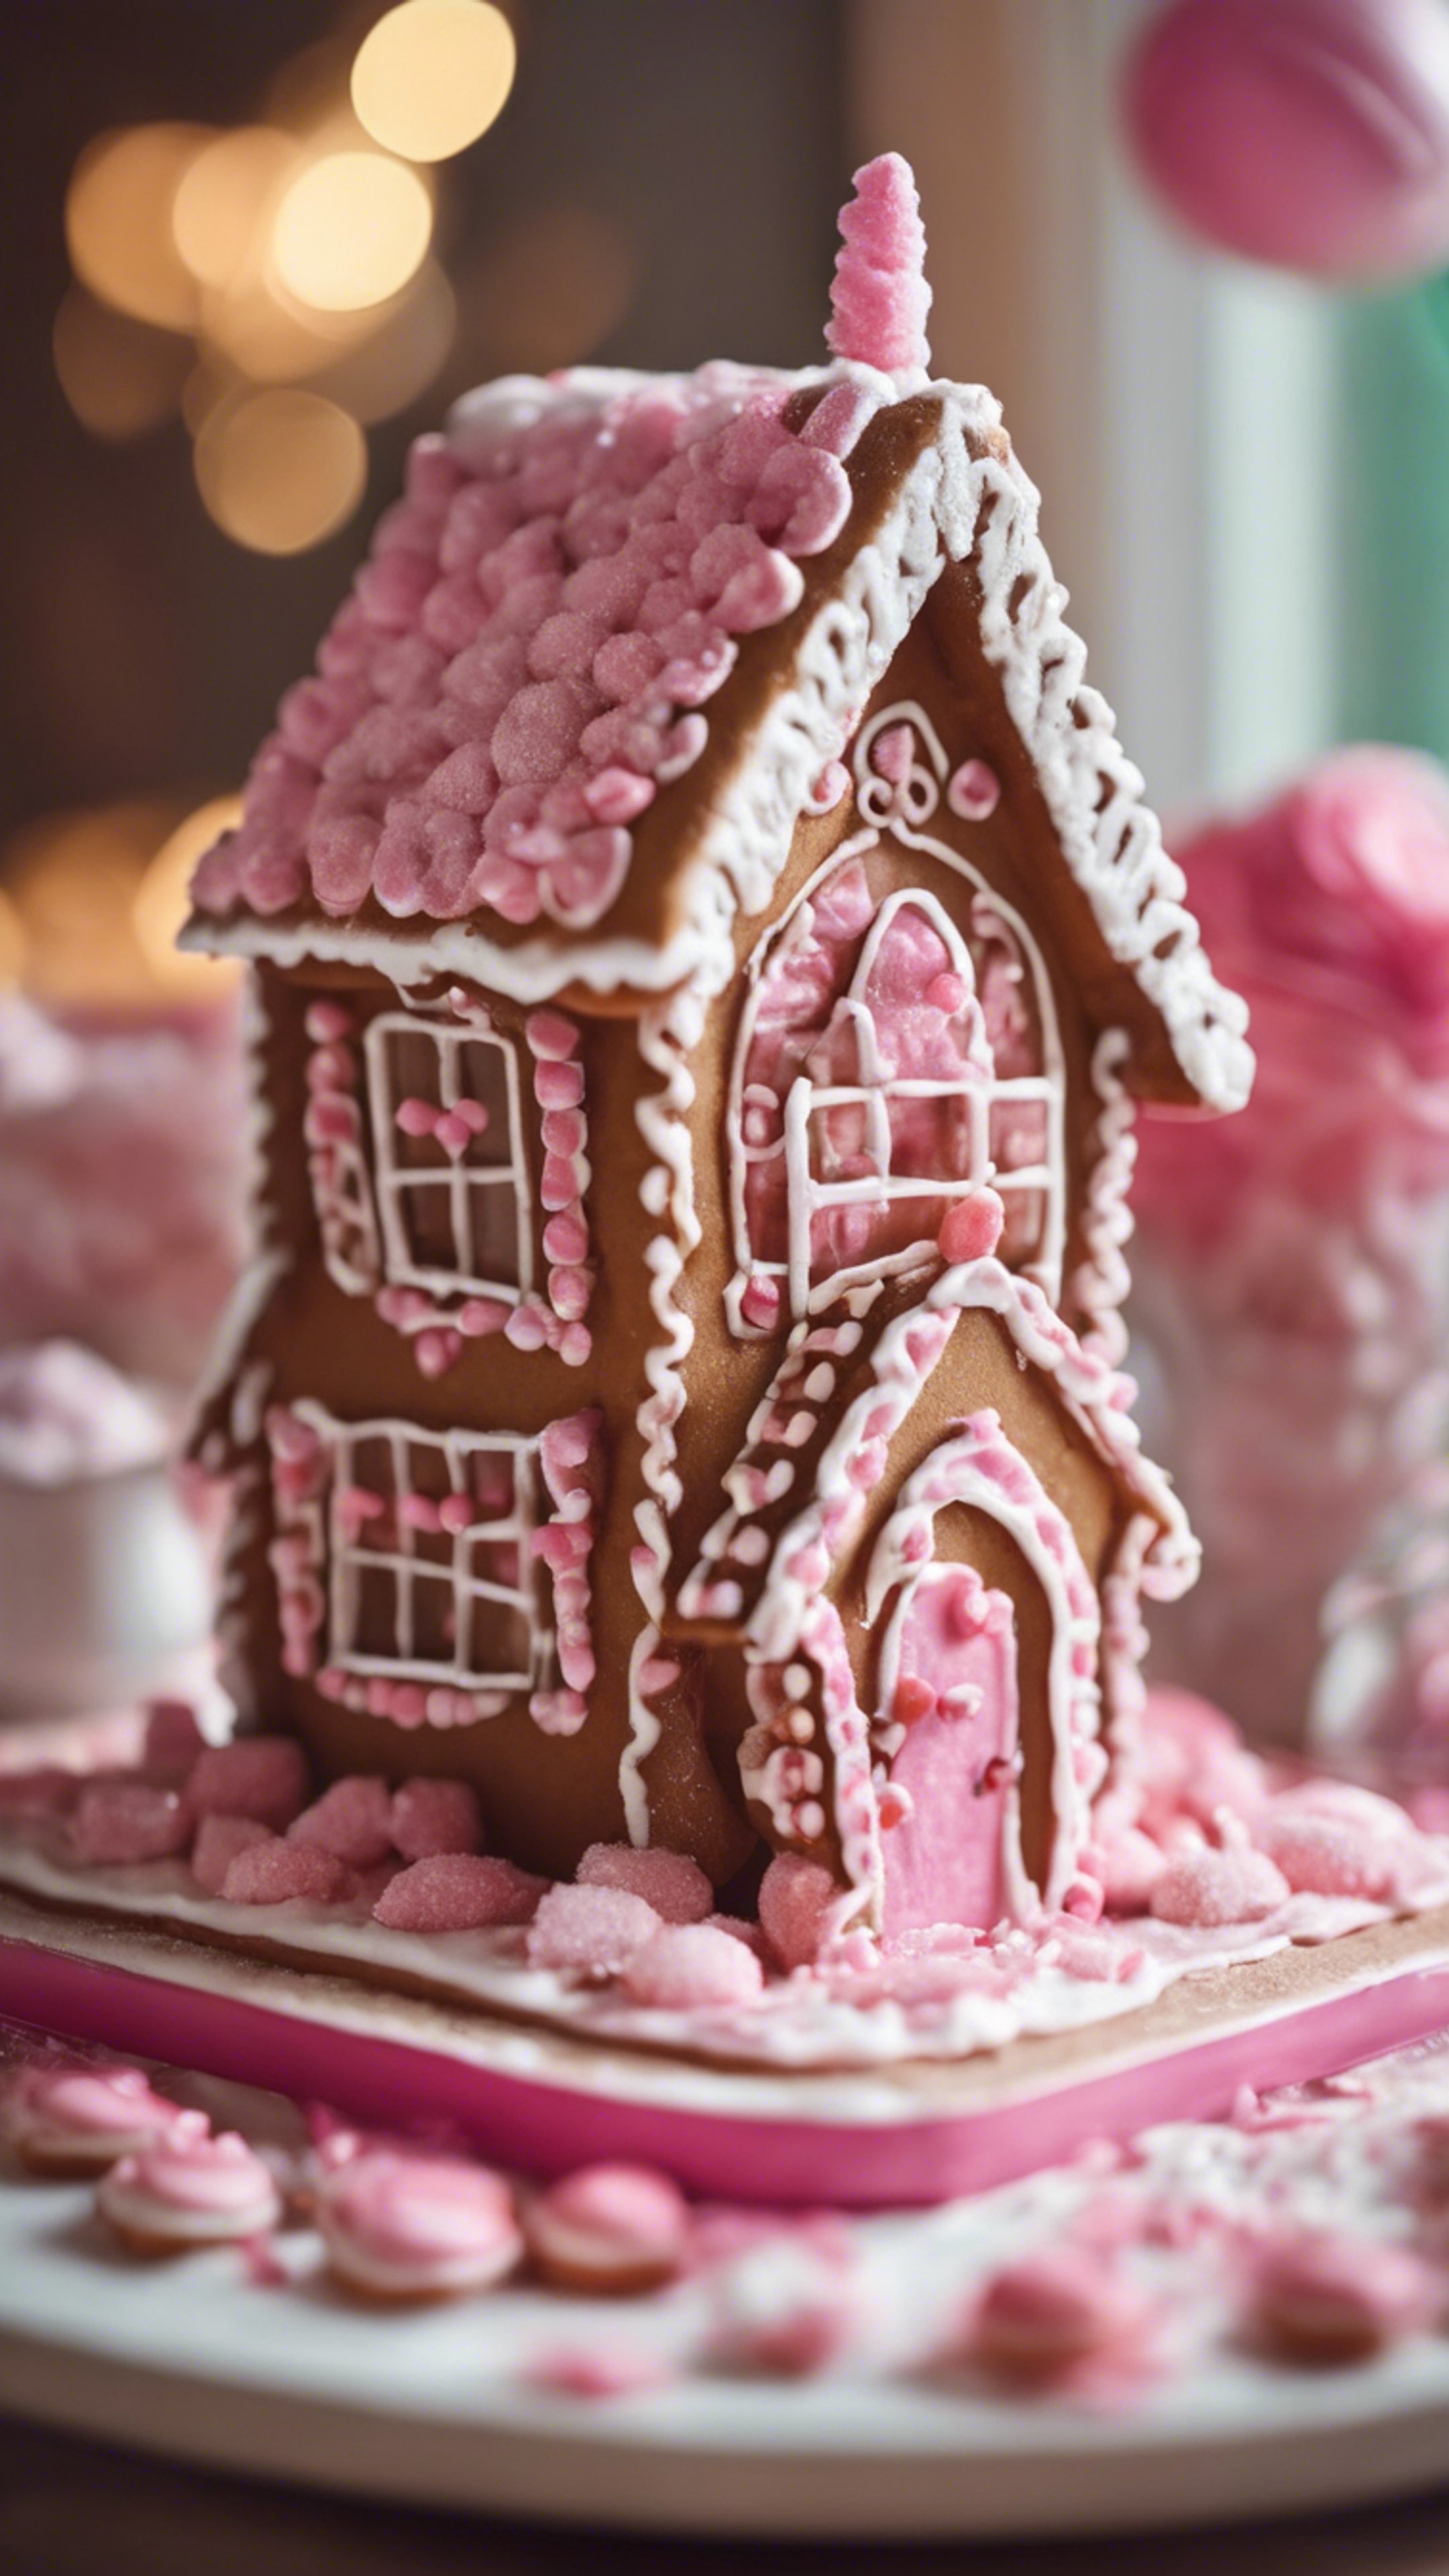 A cute gingerbread house adorned with pink icing and candy. 牆紙[80166f7992434f38b590]